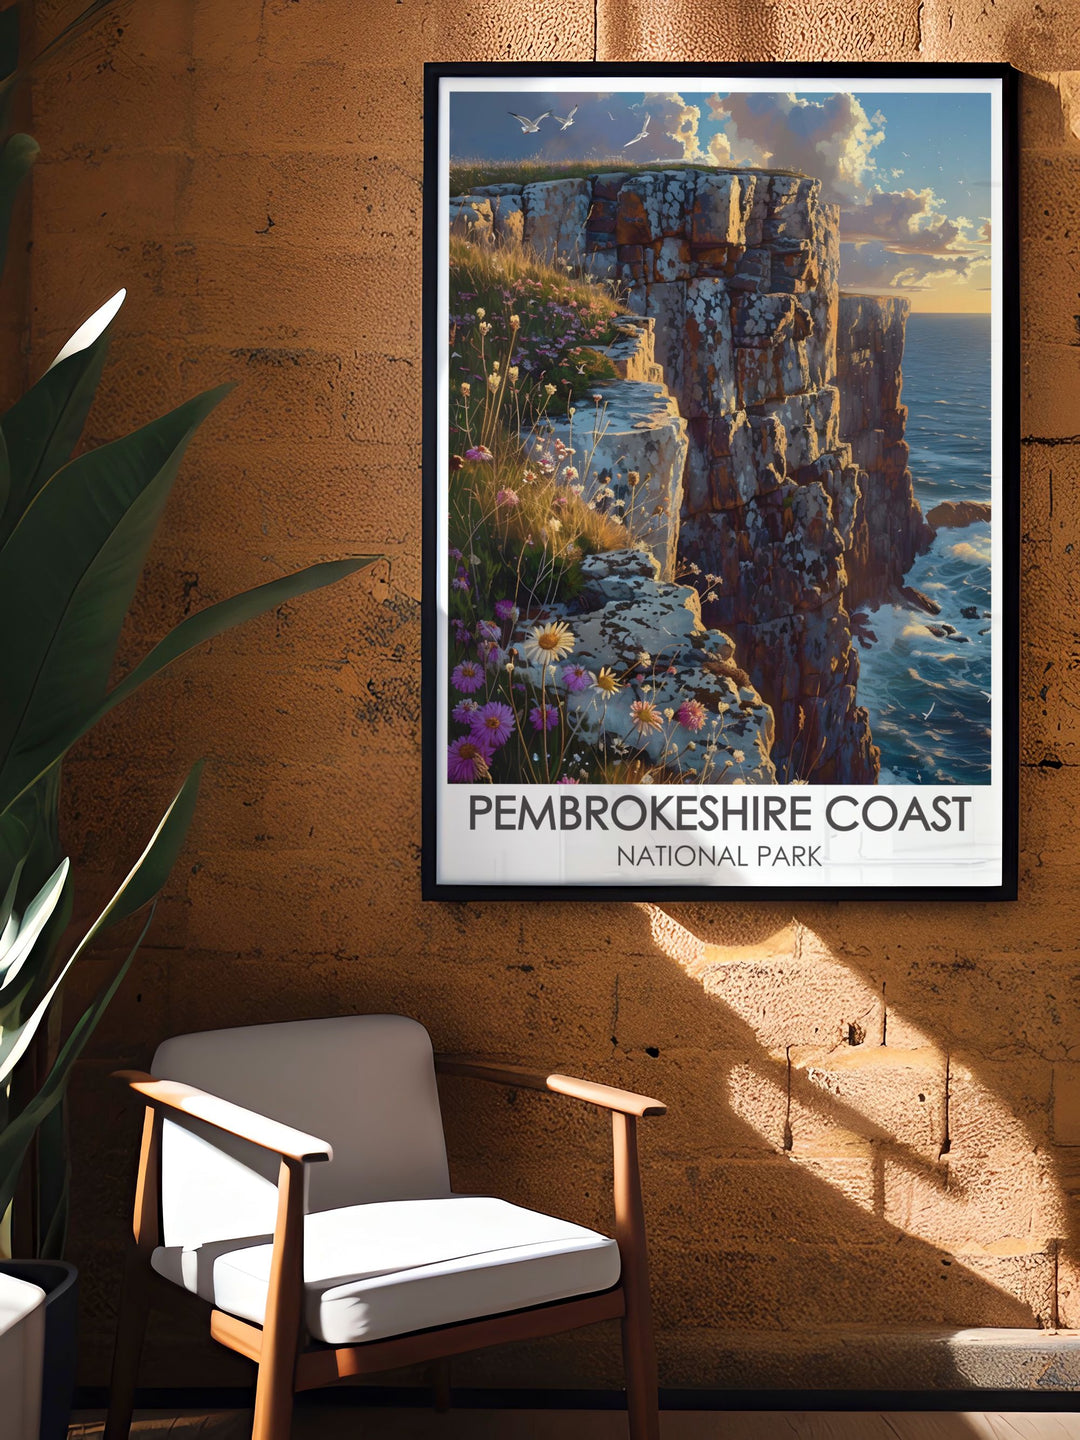 National Park Wales print featuring St. Davids Head with detailed artwork capturing the natural beauty of the Pembrokeshire Coast perfect for home decor enthusiasts and those who appreciate the stunning landscapes of Wales.